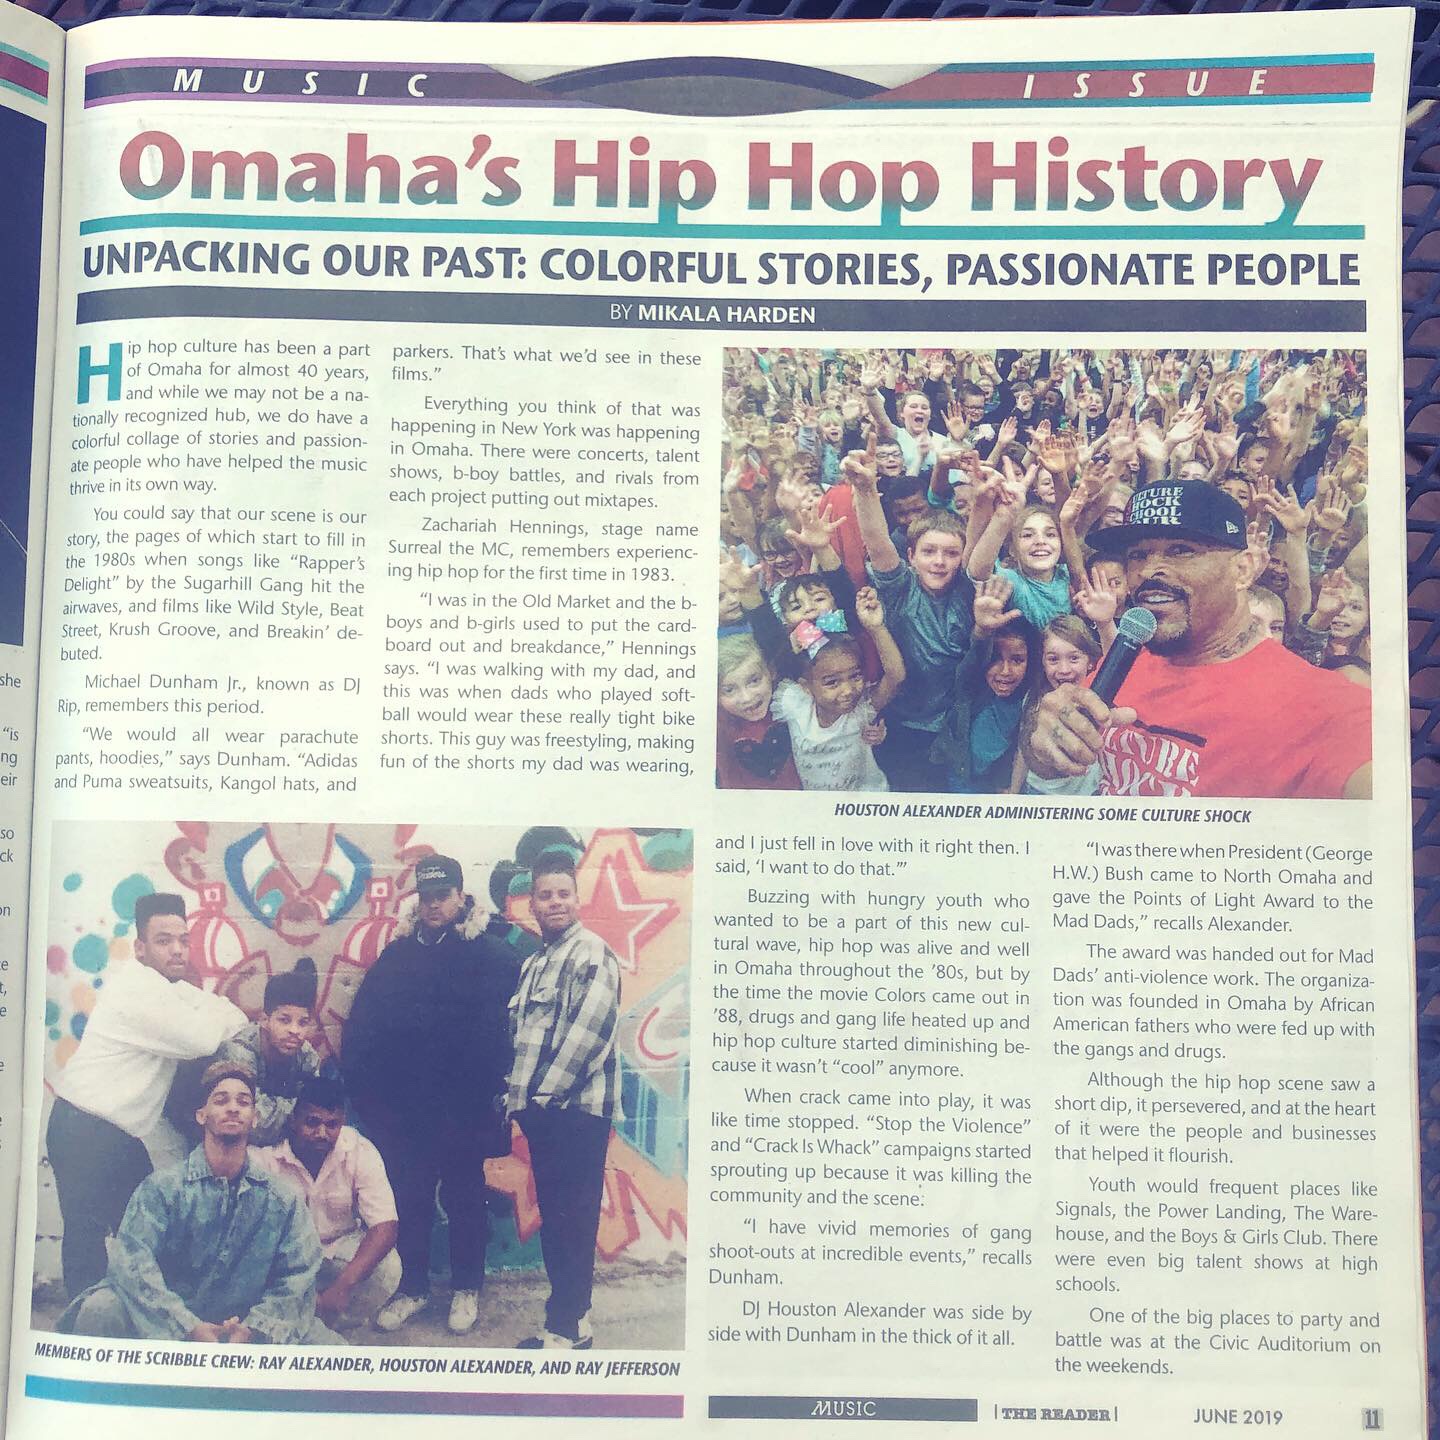 Omaha’s Hip Hop History: Unpacking Our Past